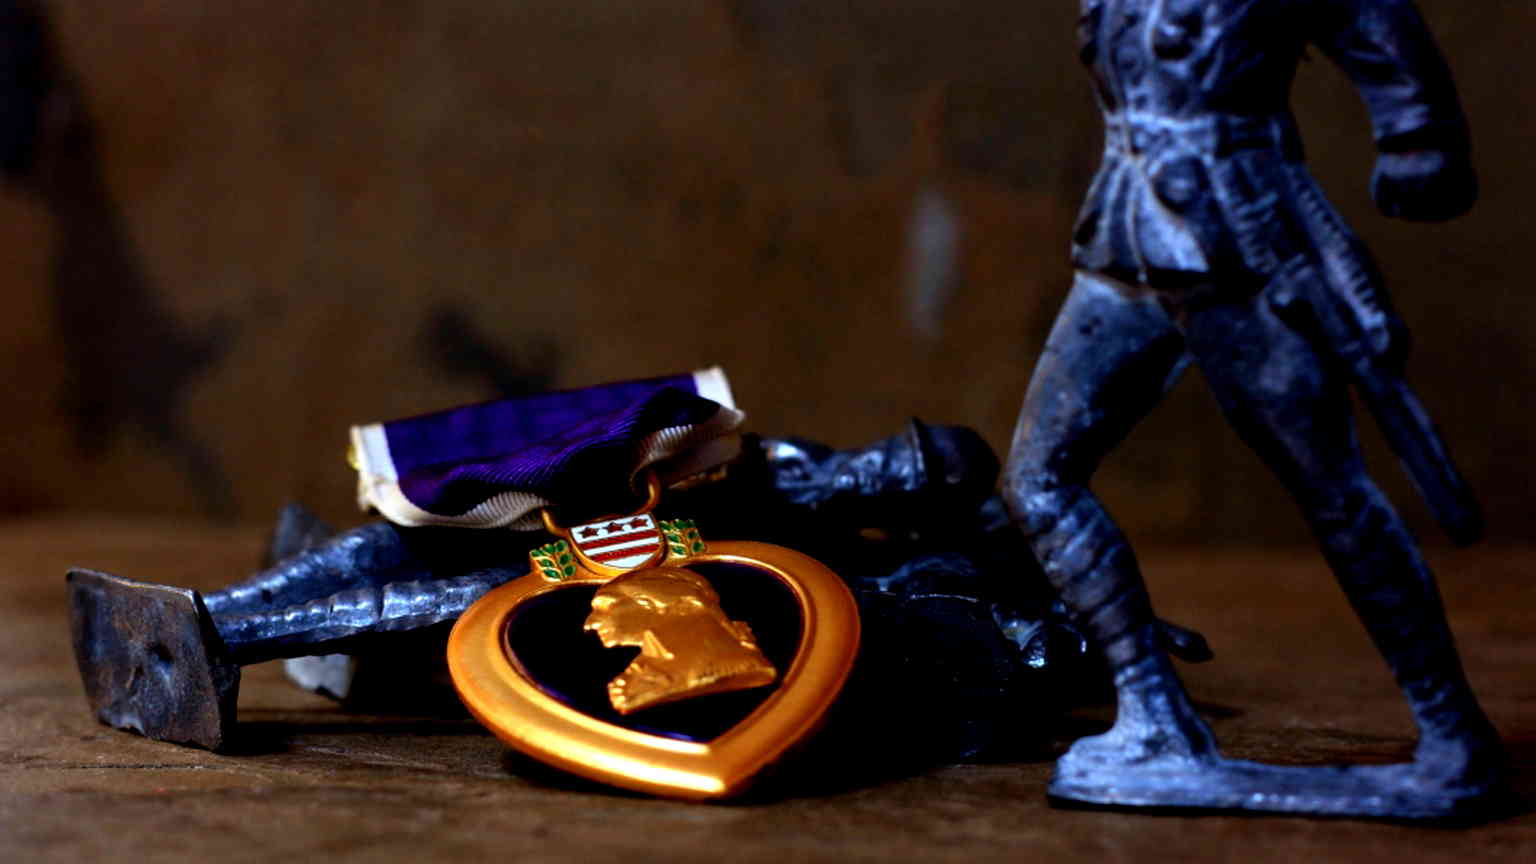 5 WWII soldiers awarded posthumous Purple Heart medals 80 years after plane crash